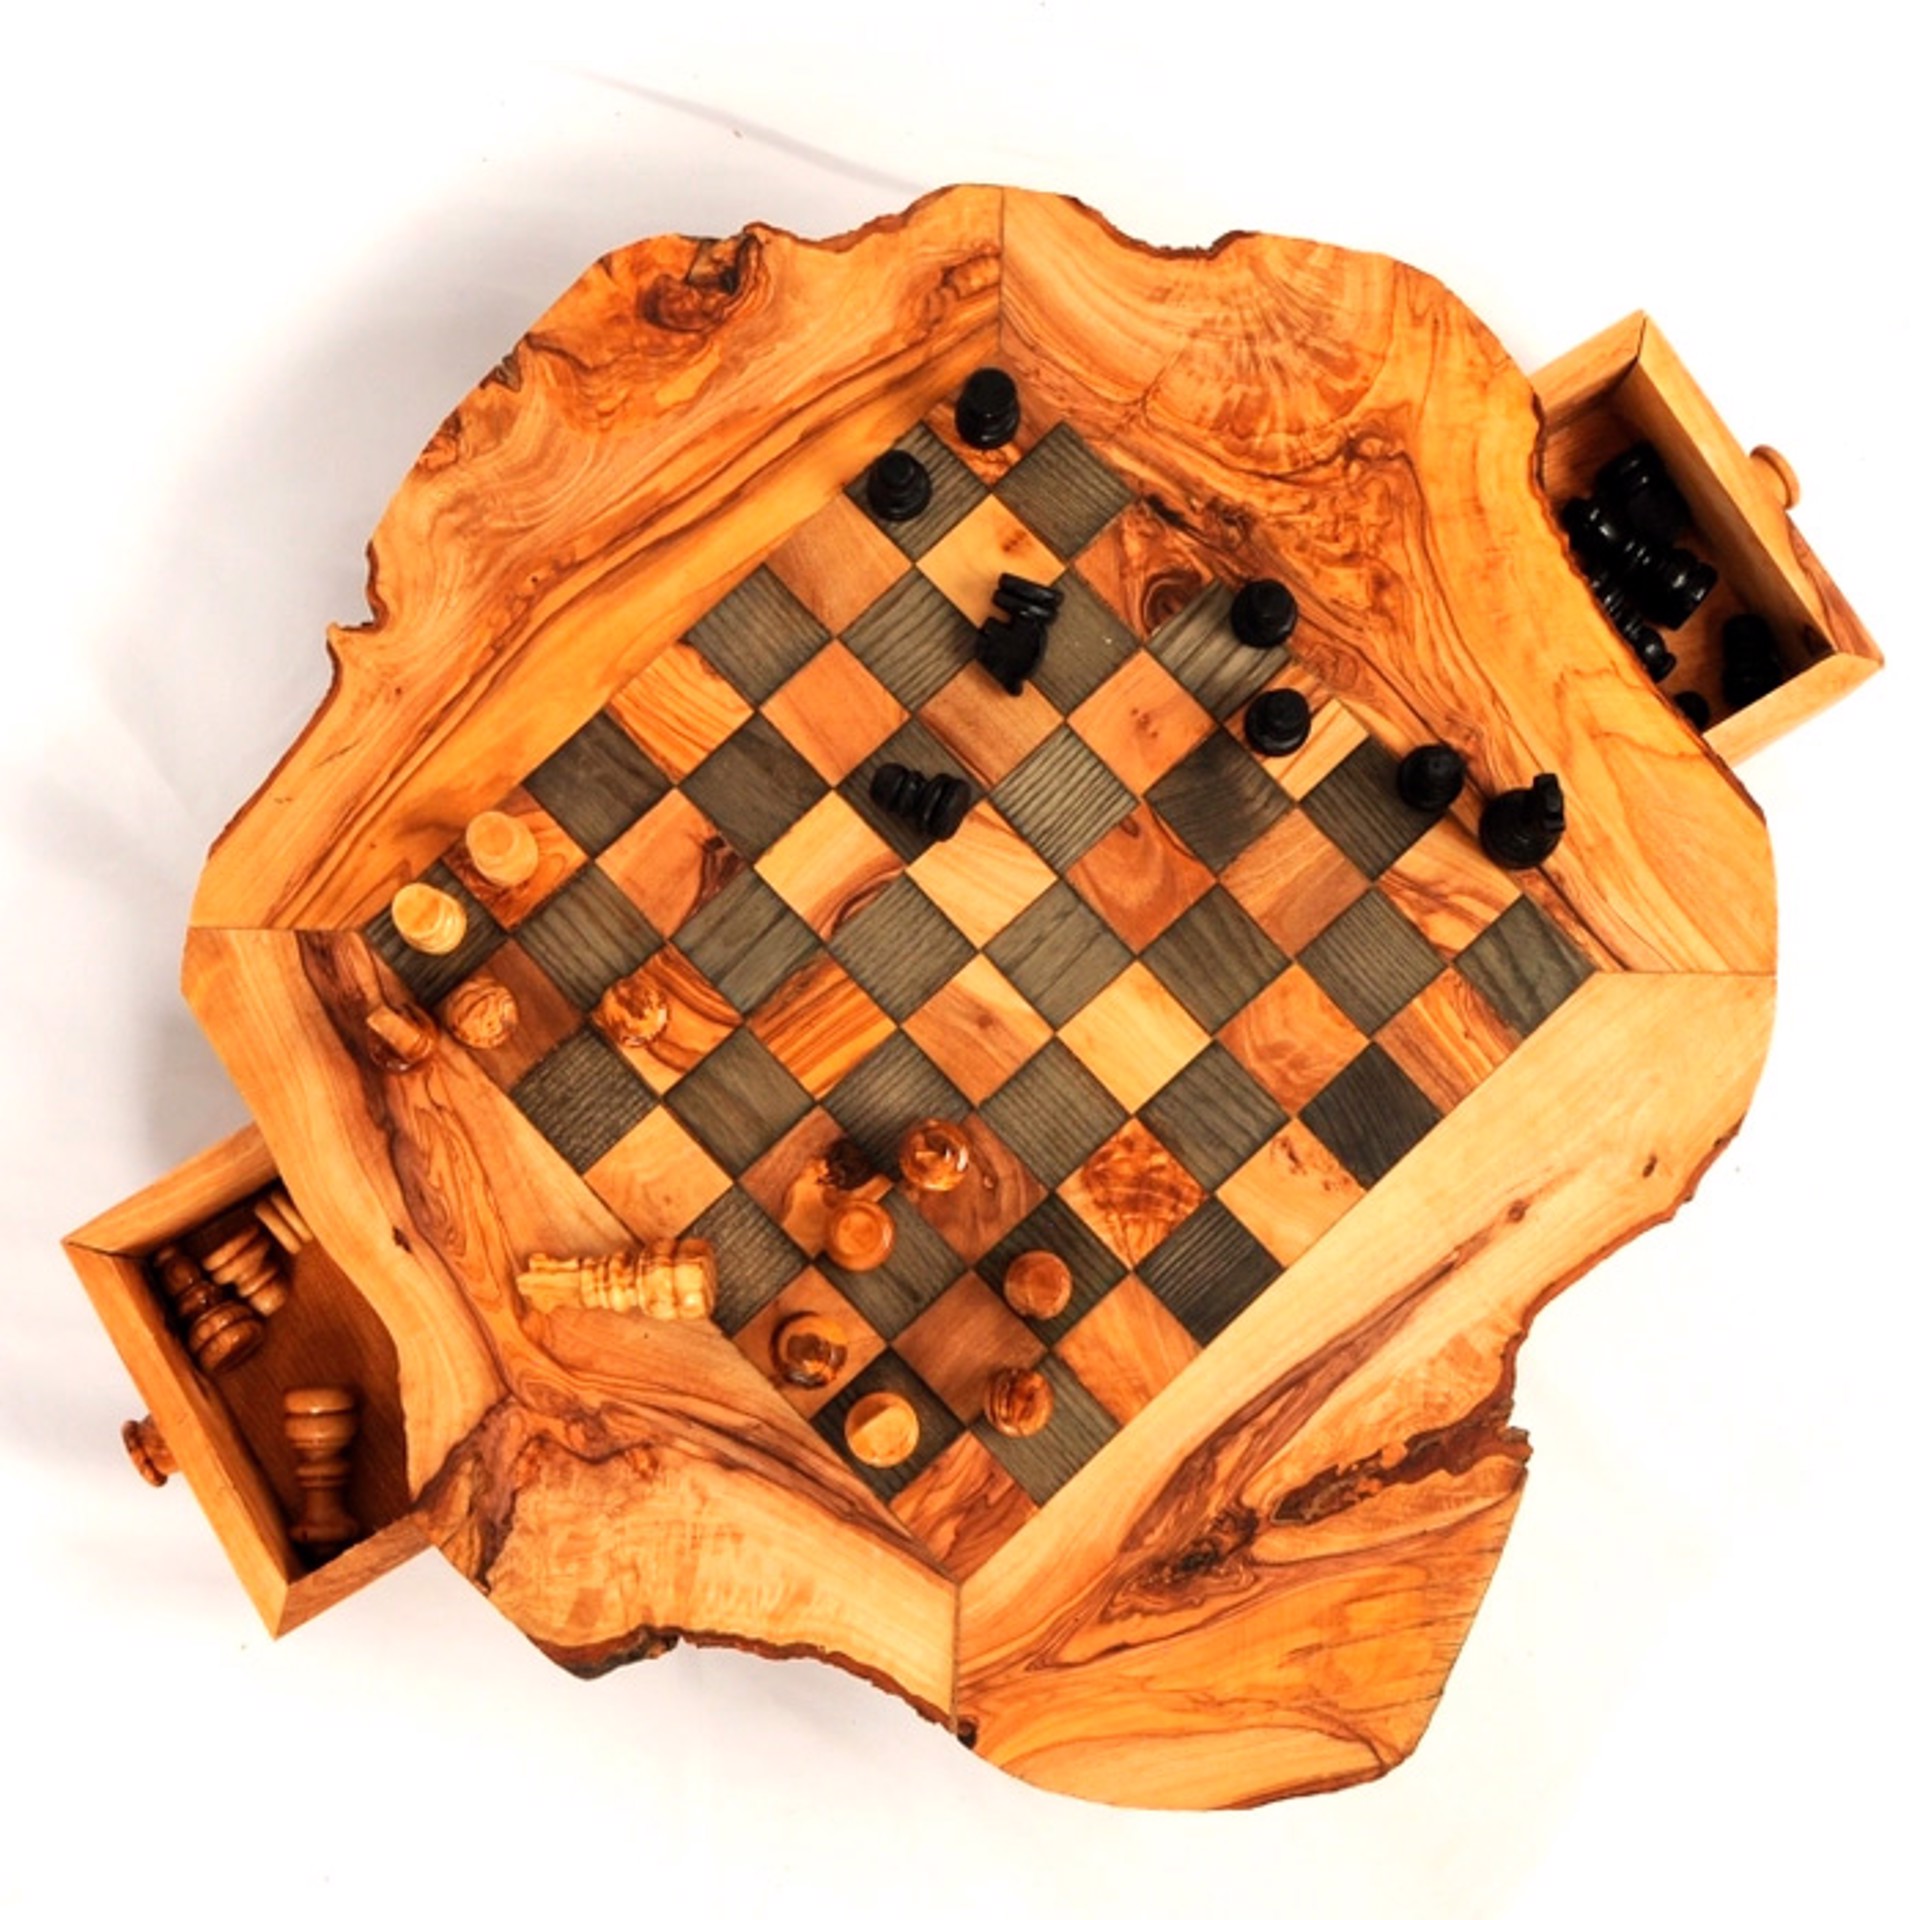 Rustic Olive Wood Chess Set by BeldiNest